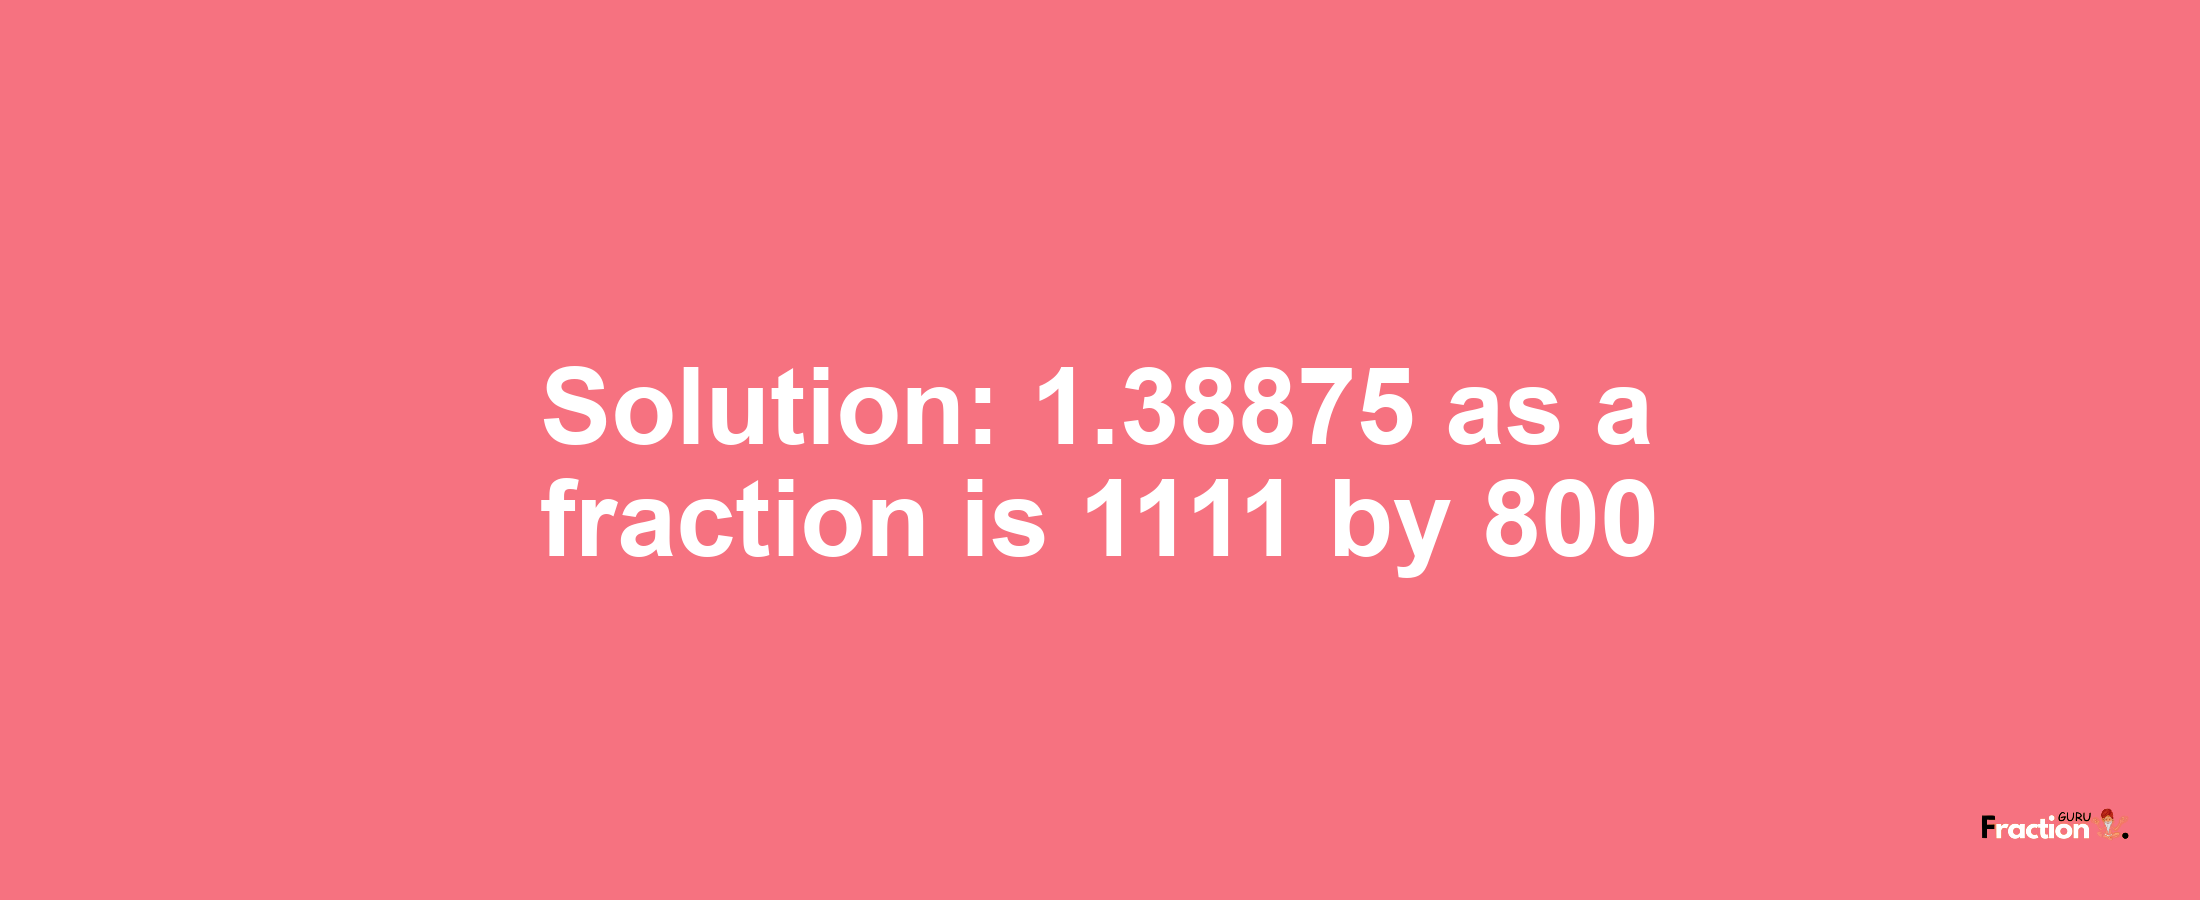 Solution:1.38875 as a fraction is 1111/800